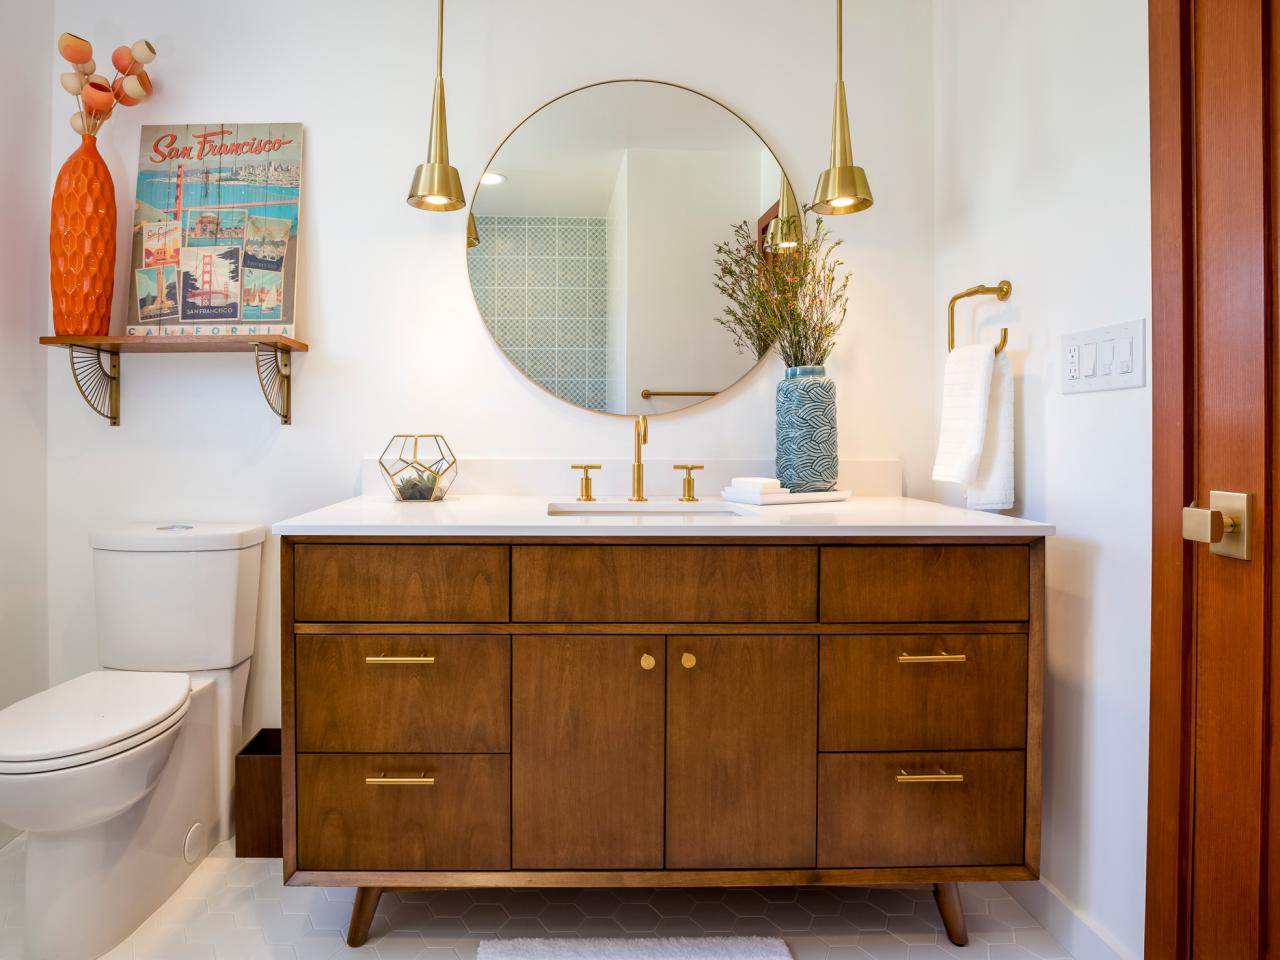 Clever Half Bath Design Ideas to Make the Most of Your Spaces